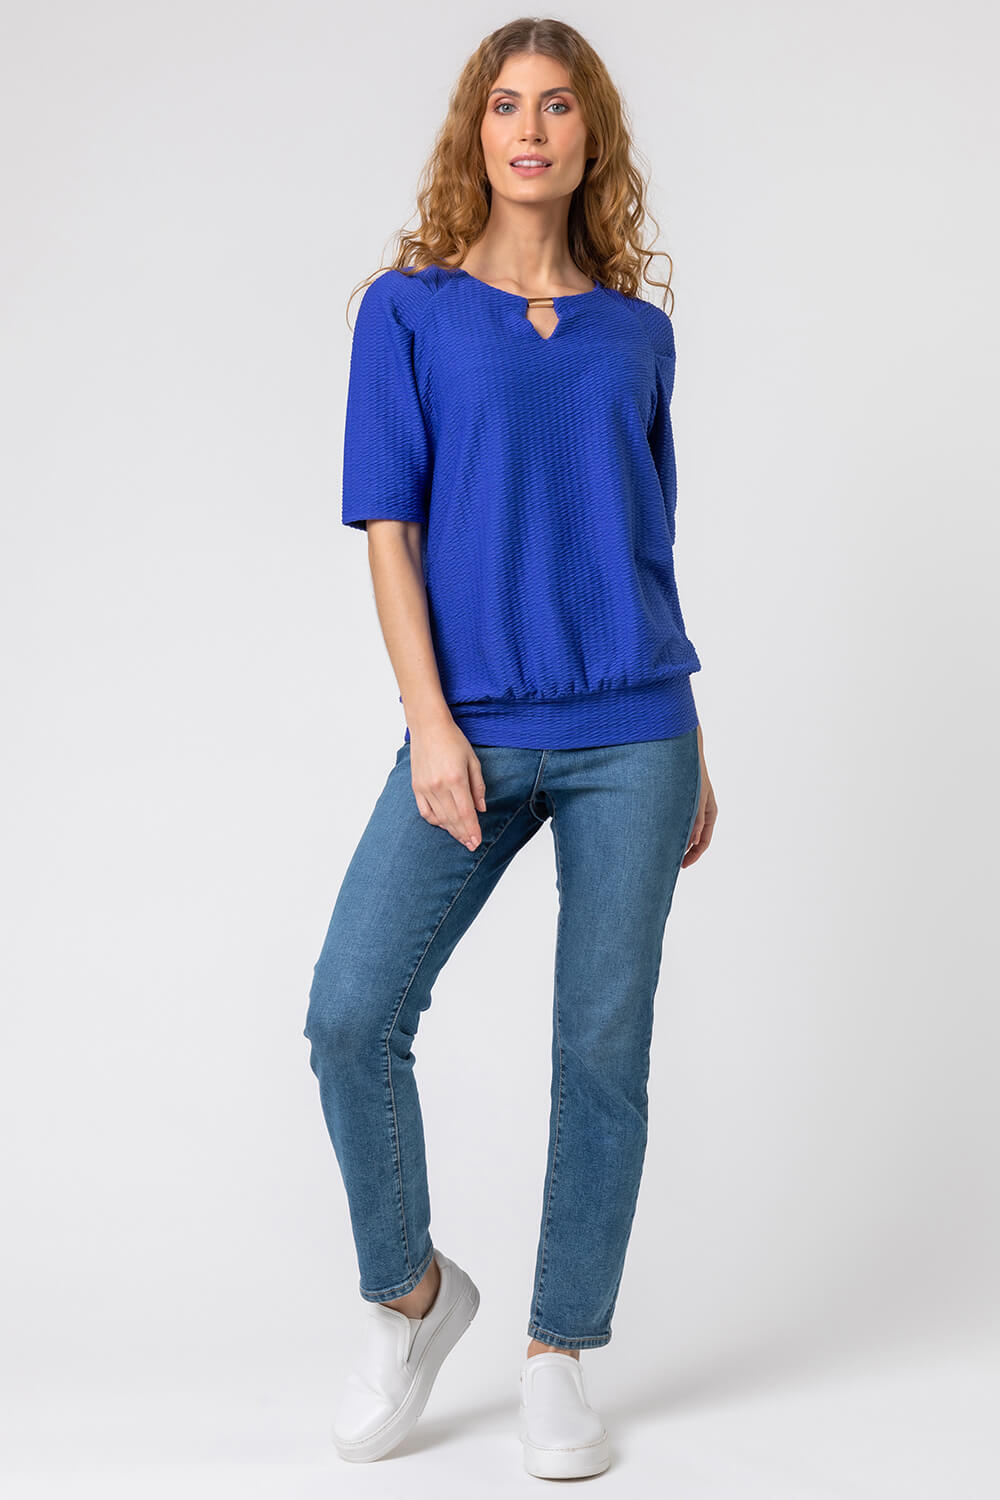 Royal Blue Keyhole Neck Textured Top, Image 3 of 4